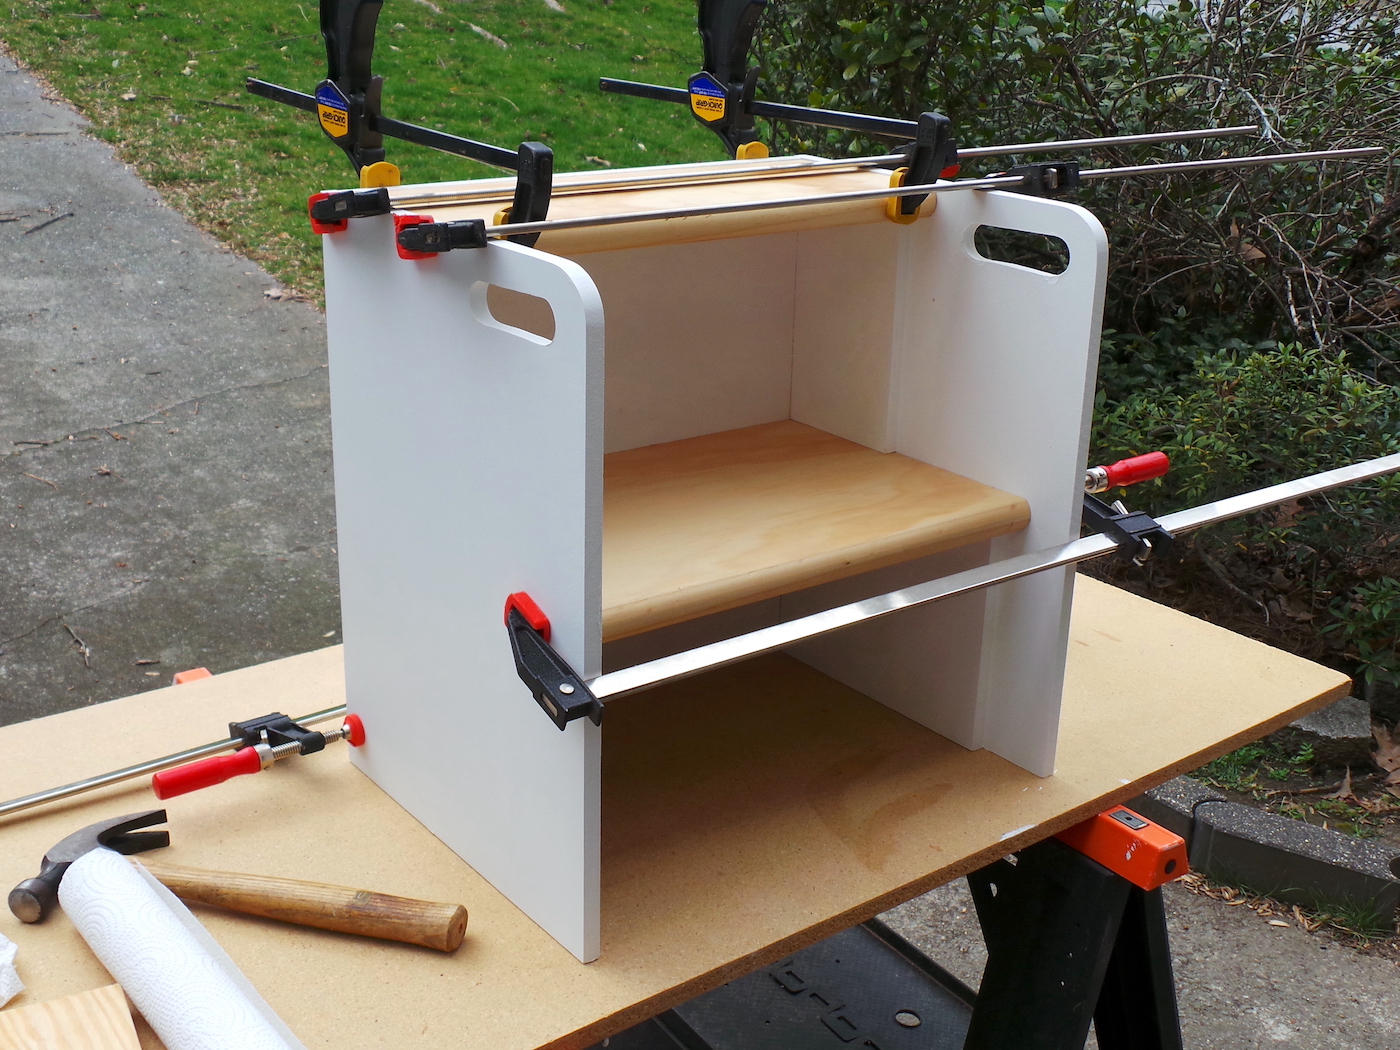 Finished DIY wood step stool being held together with clamps to dry